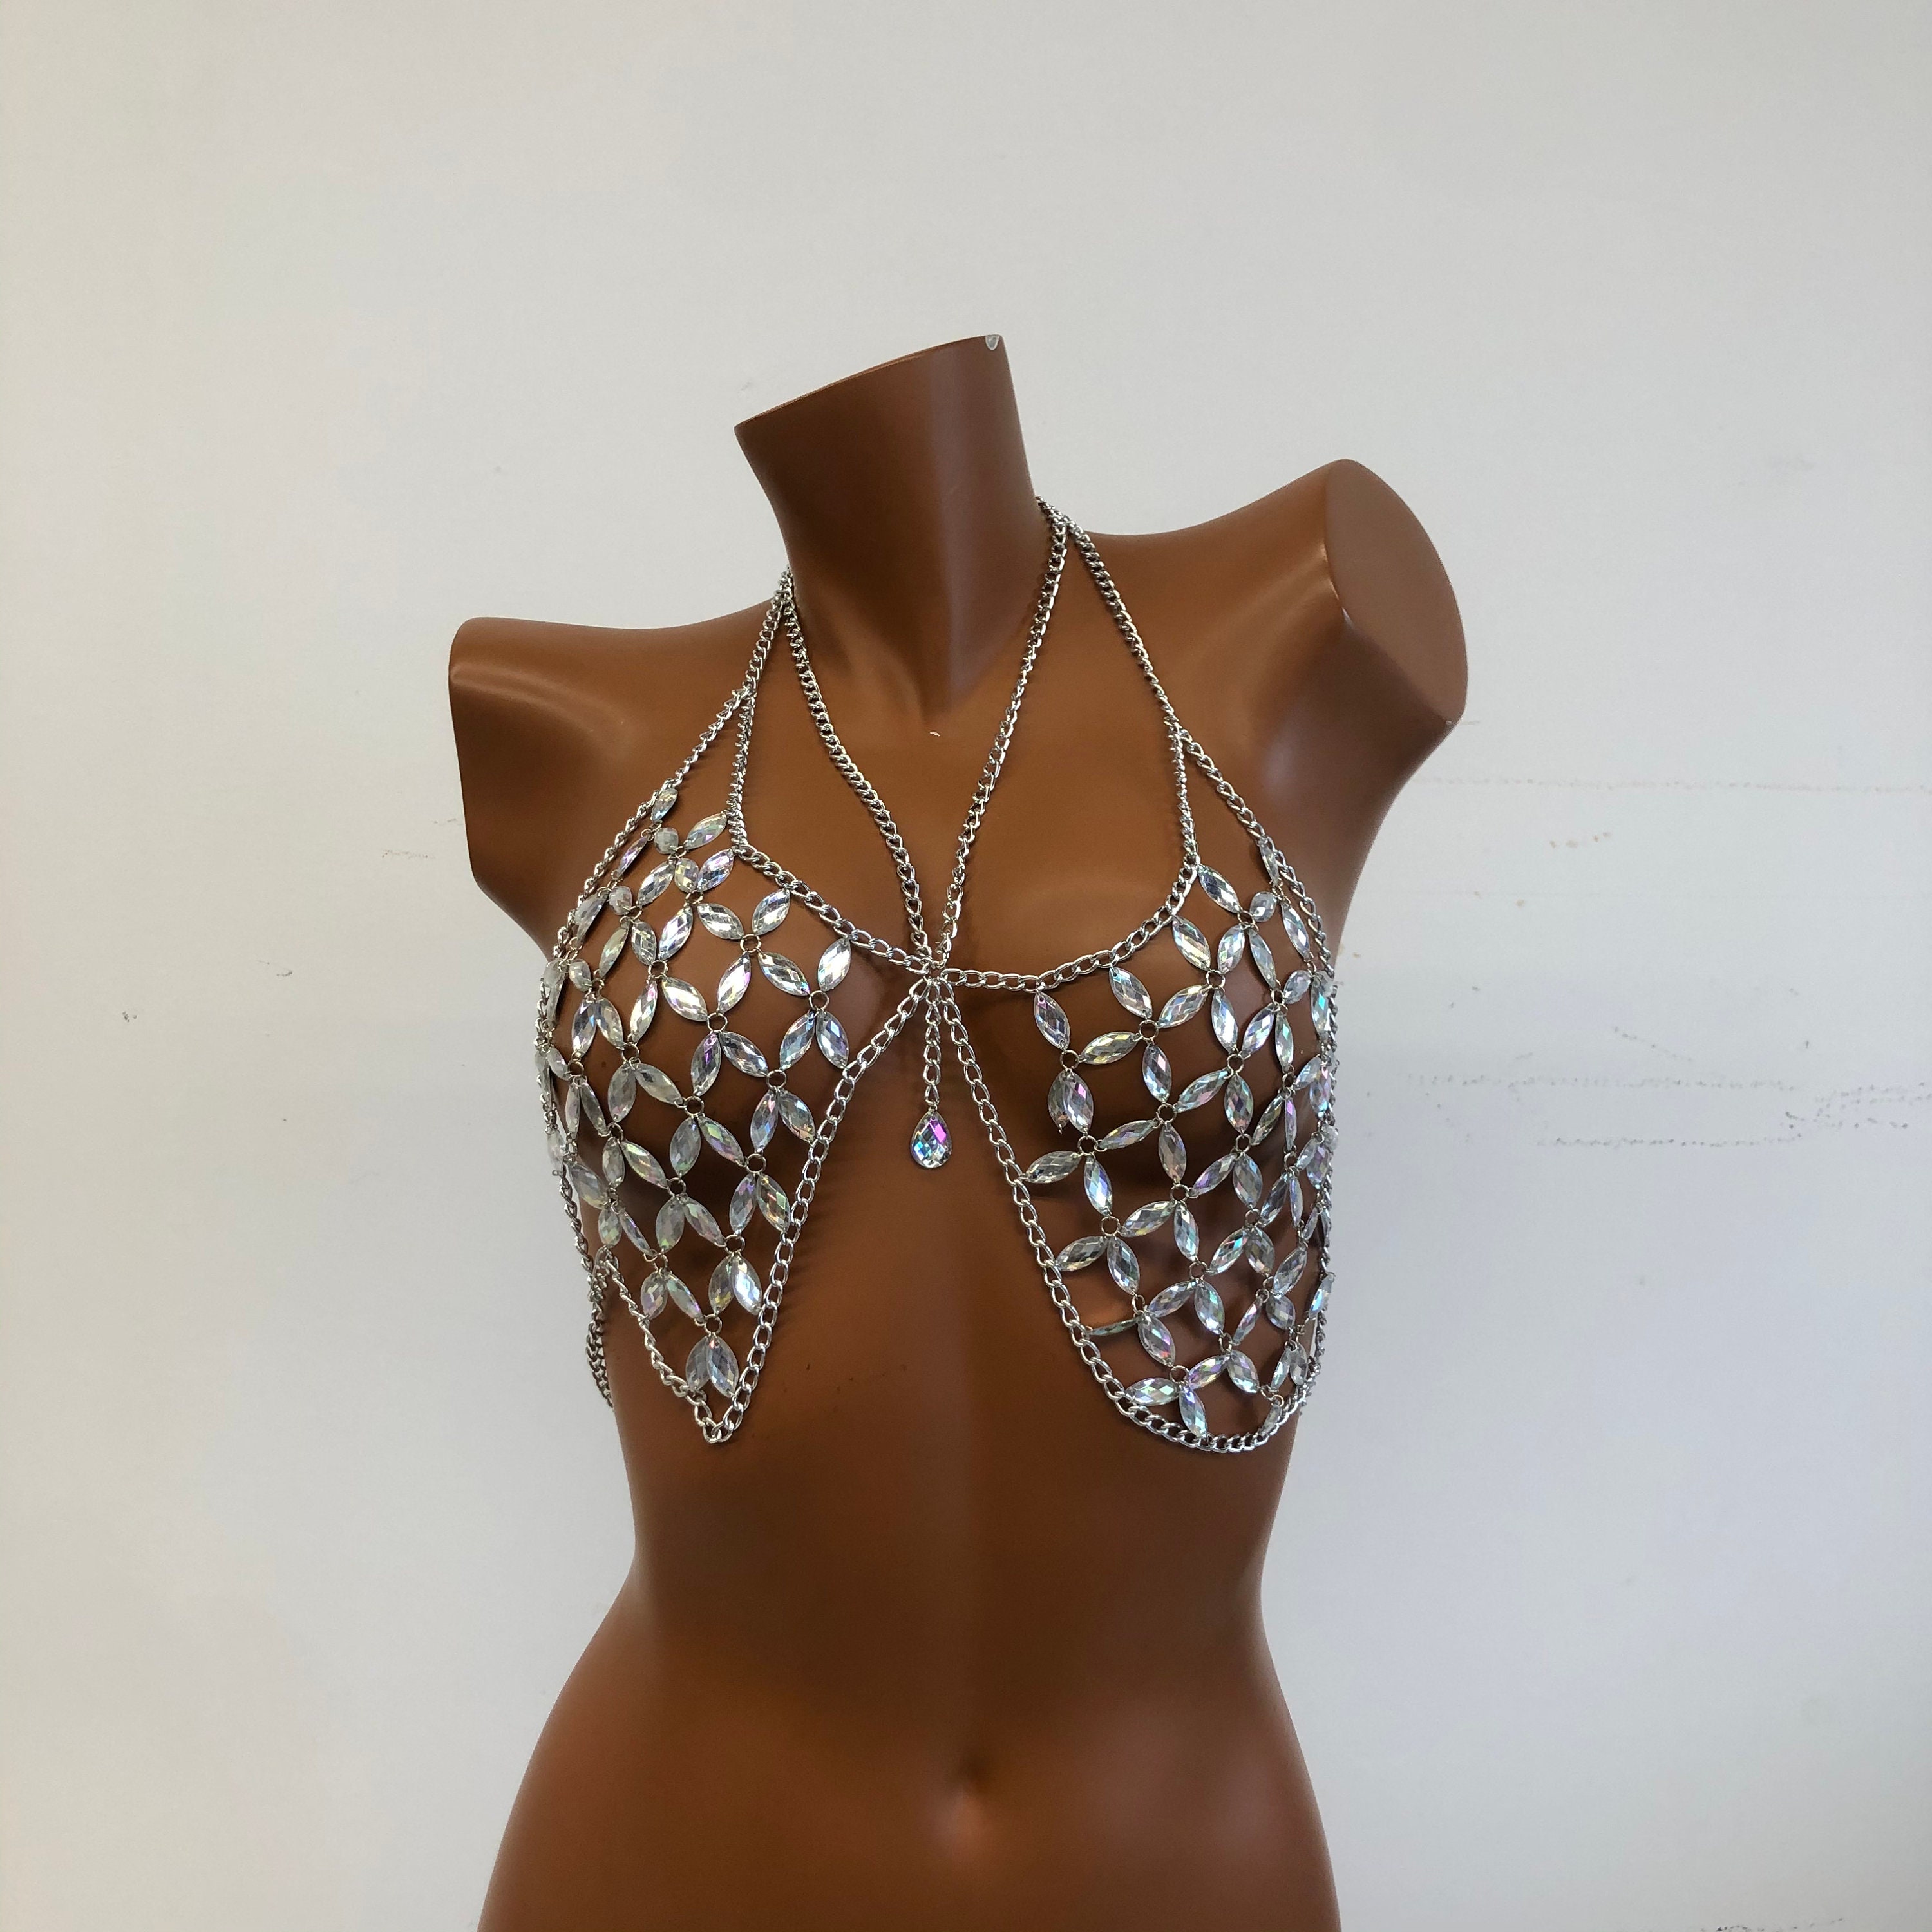 Sparkling Rhinestone Bra and Panty Set with Chain Detail – Verne Crescent